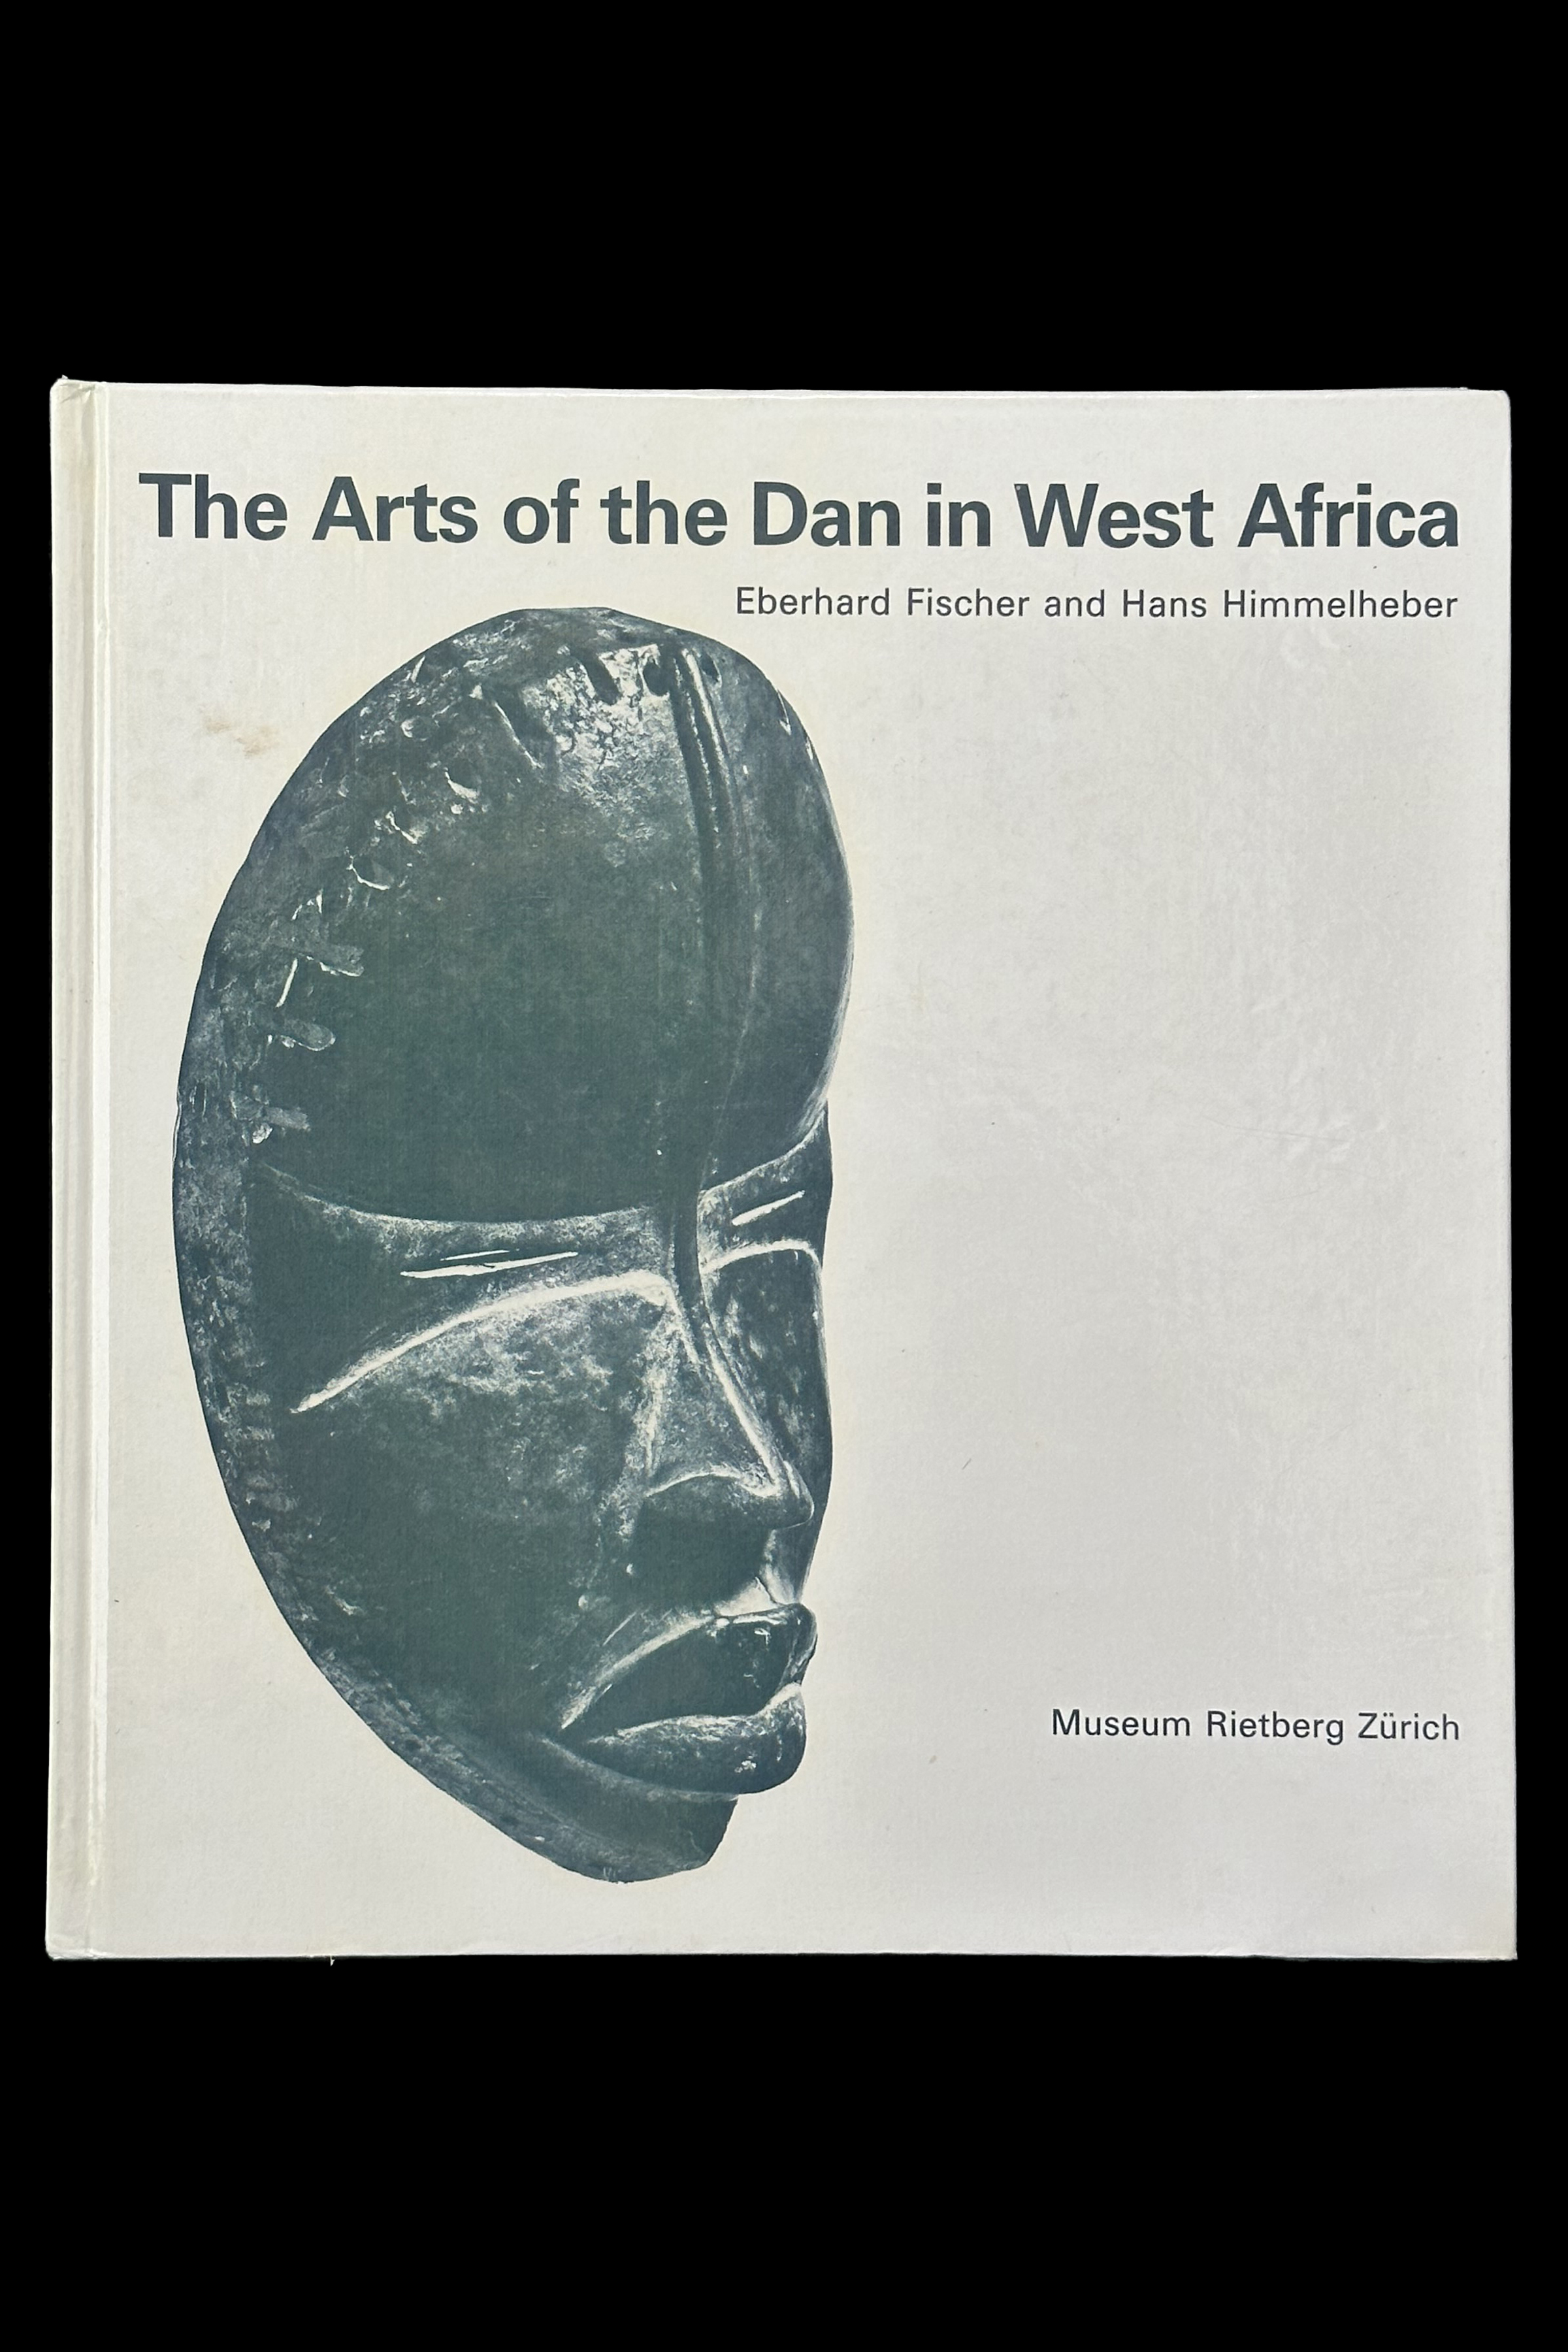 The Arts of the Dan in West Africa by  by Eberhard Fischer and Hans Himmelheber